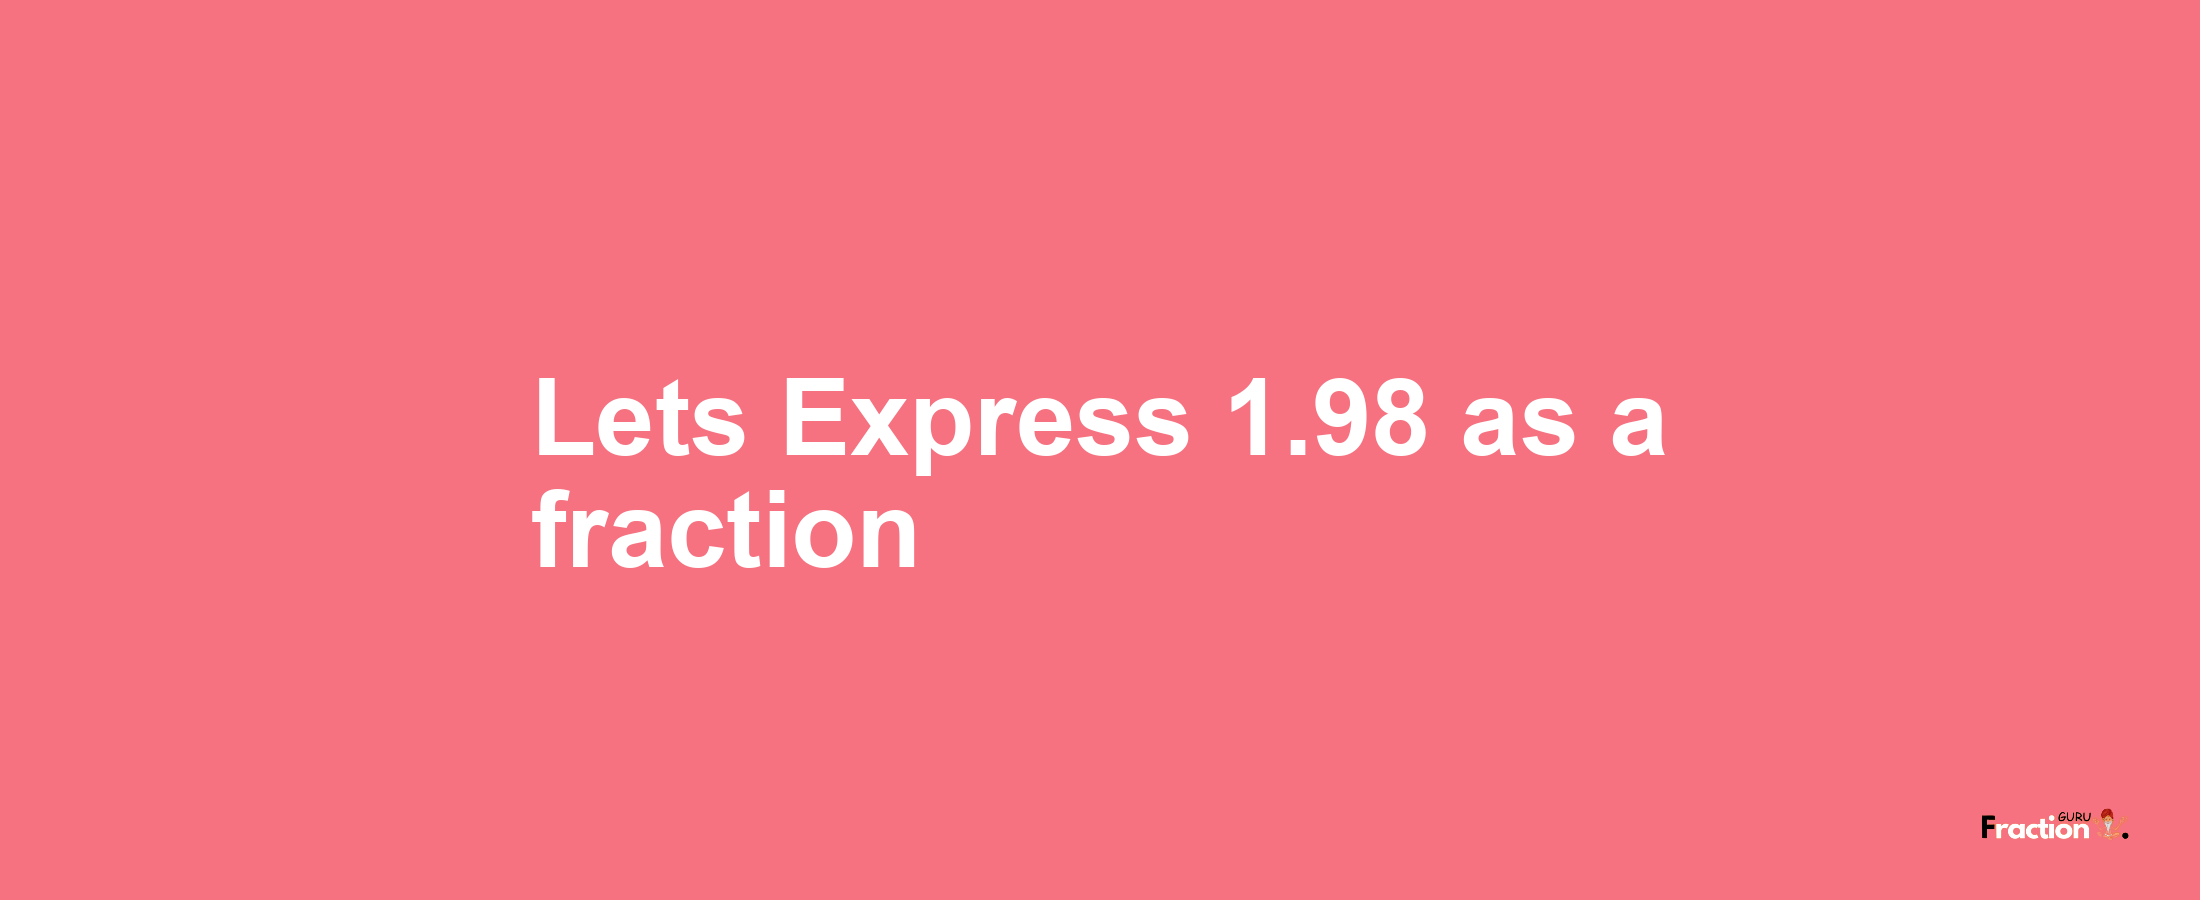 Lets Express 1.98 as afraction